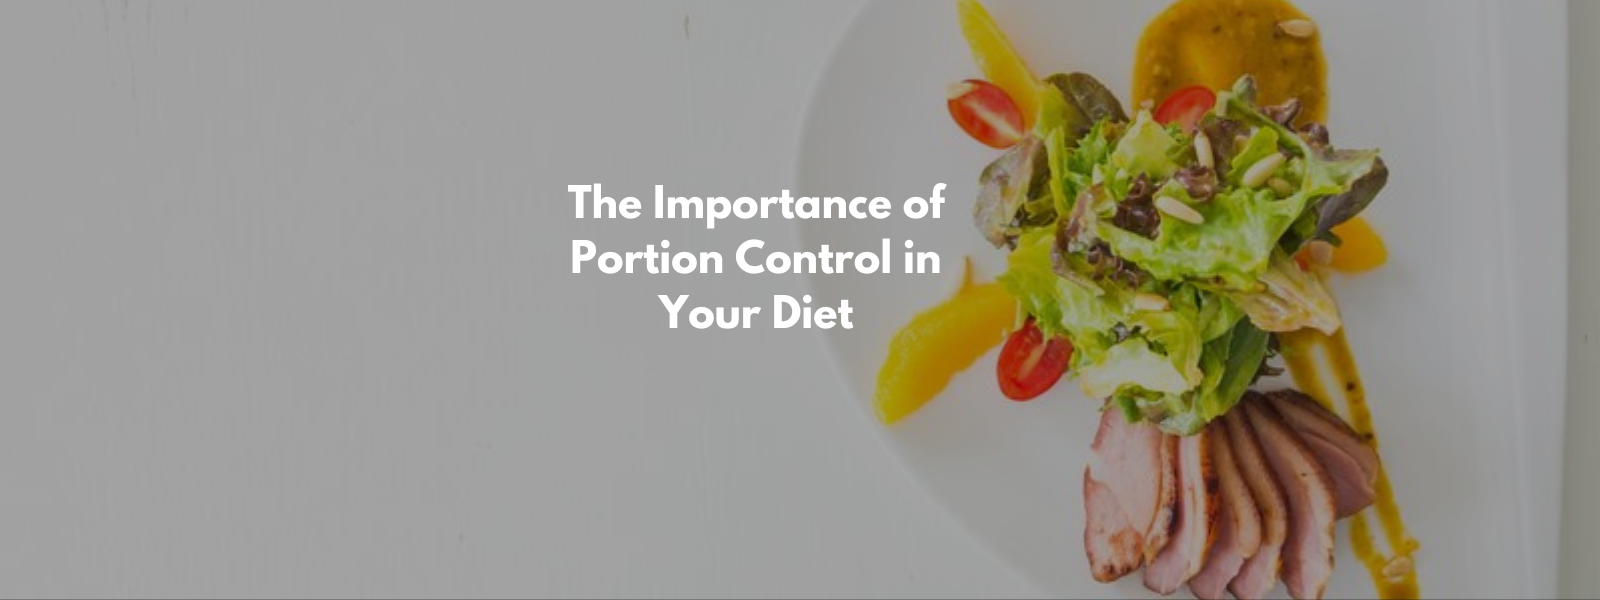 The Importance of Portion Control in Your Diet